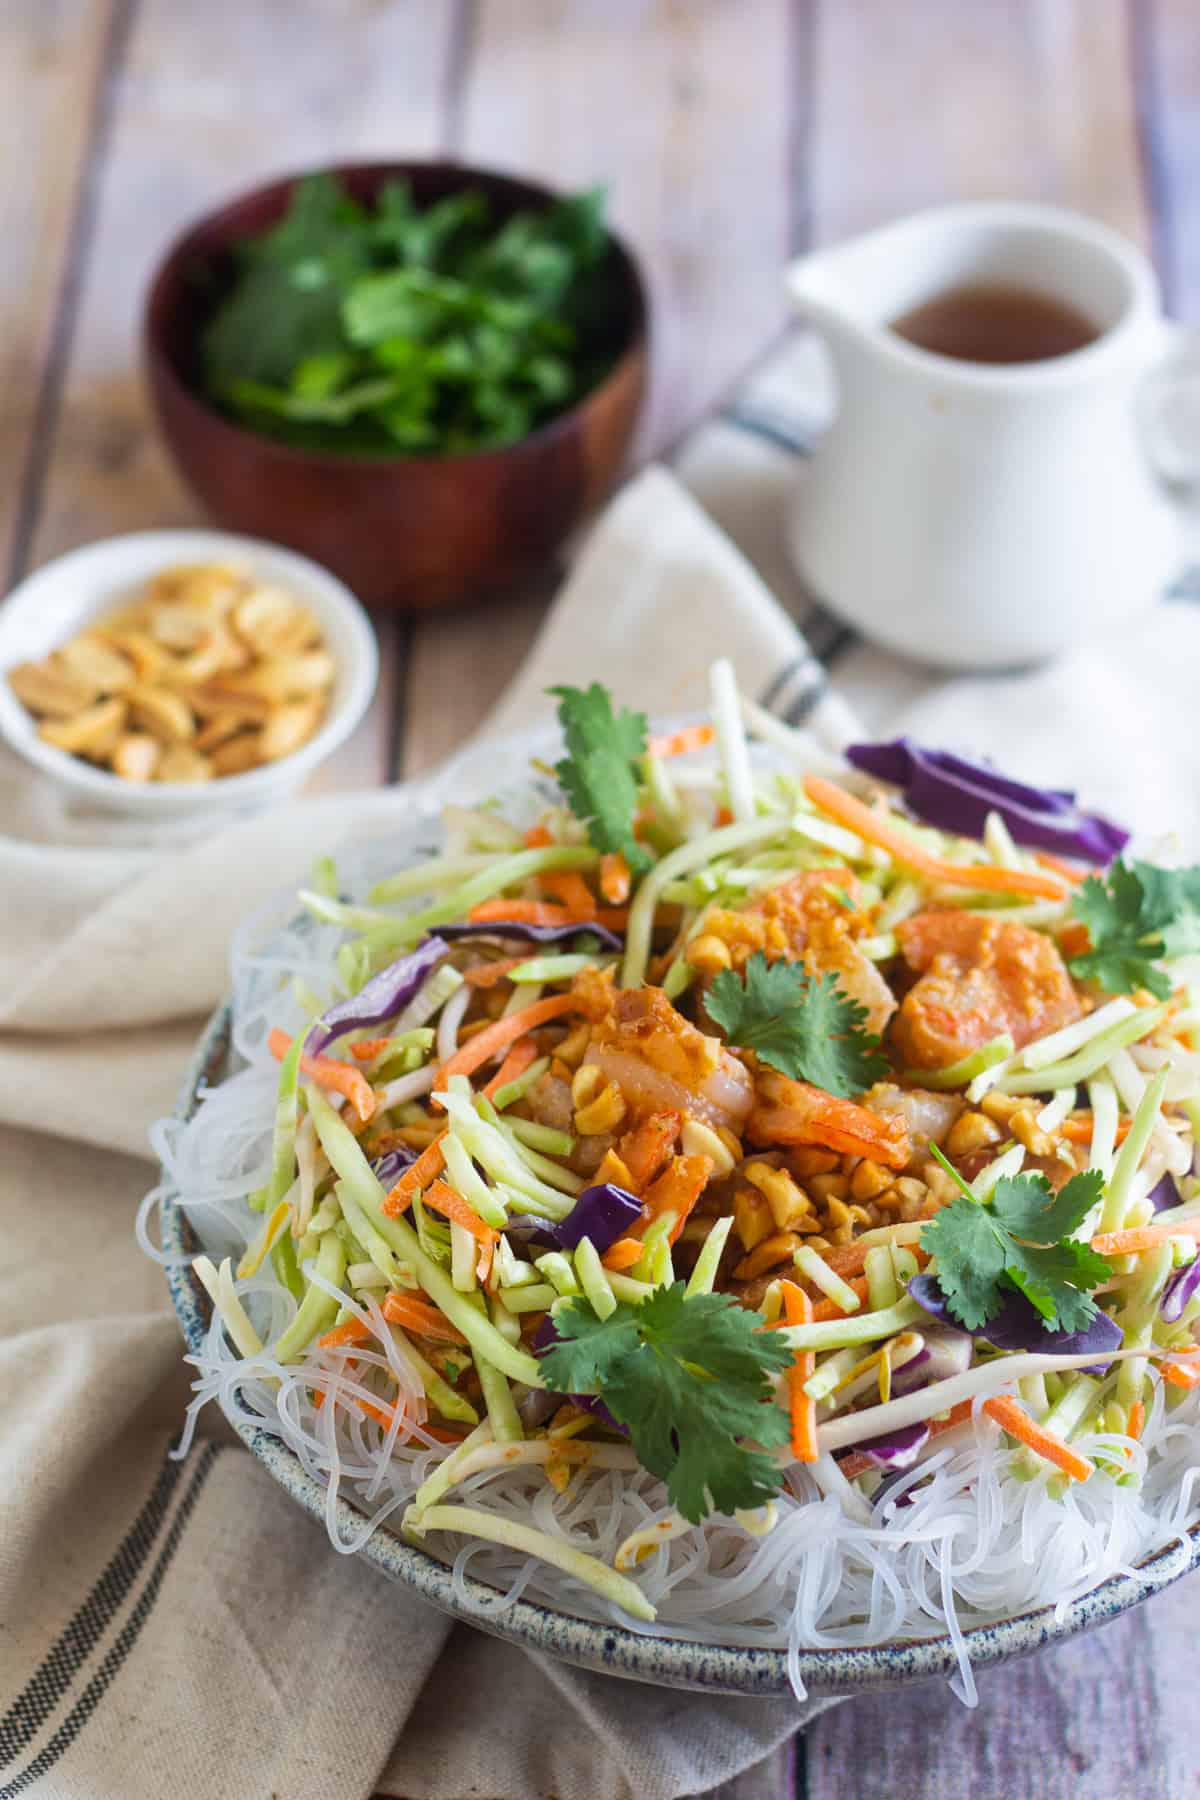 Make this Quick and Easy Shrimp Noodle Salad within minutes and have a delicious meal full of great flavors. Serve this dish with a special spicy peanut sauce for extra flavor.